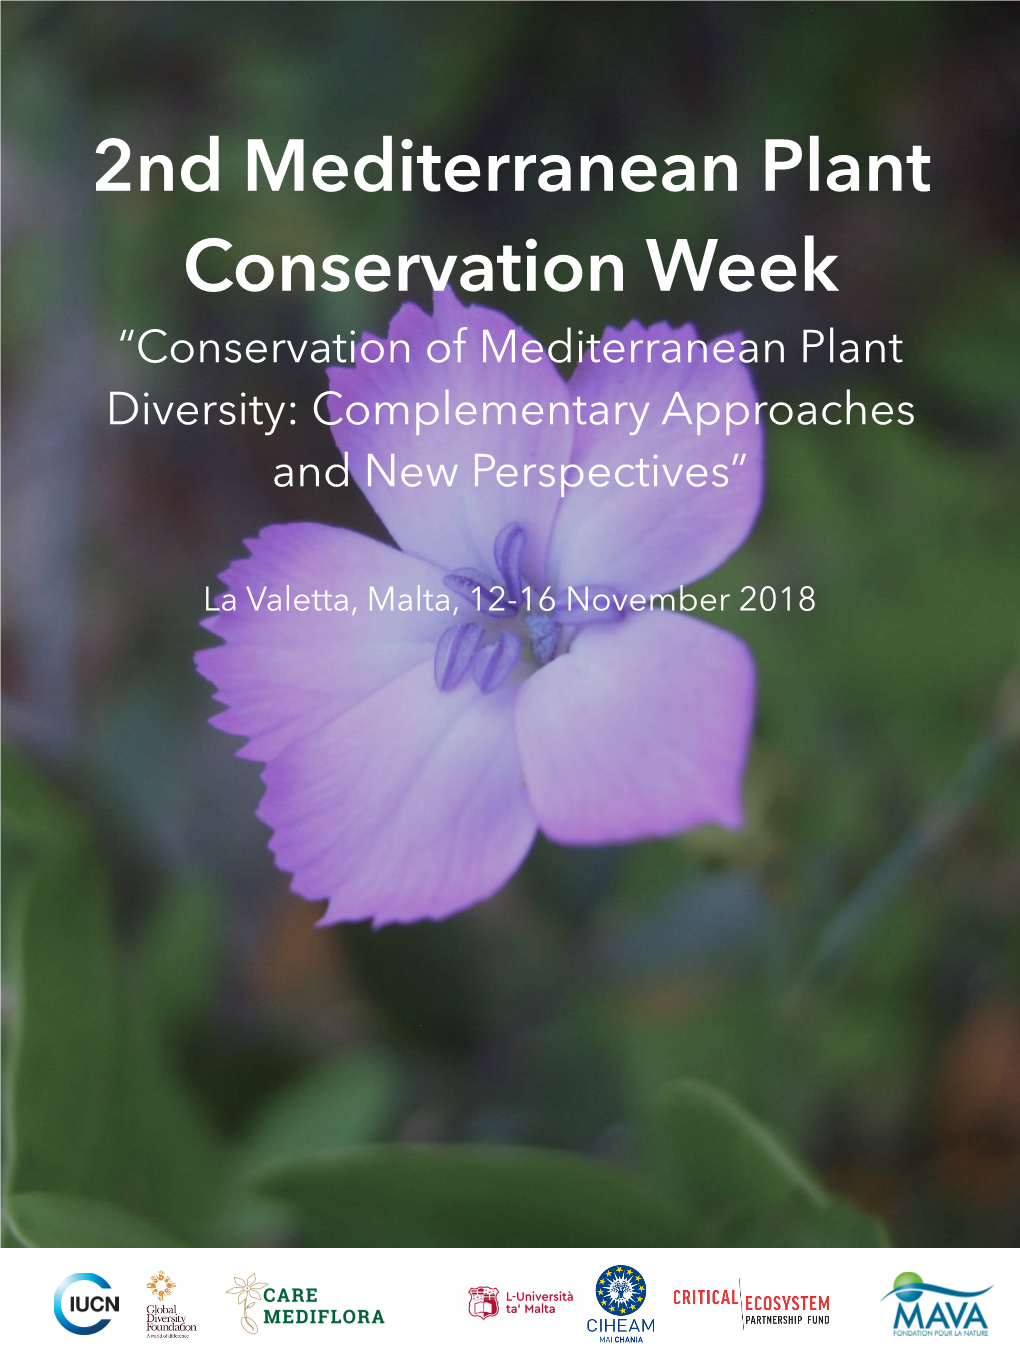 2Nd Mediterranean Plant Conservation Week “Conservation of Mediterranean Plant Diversity: Complementary Approaches and New Perspectives”